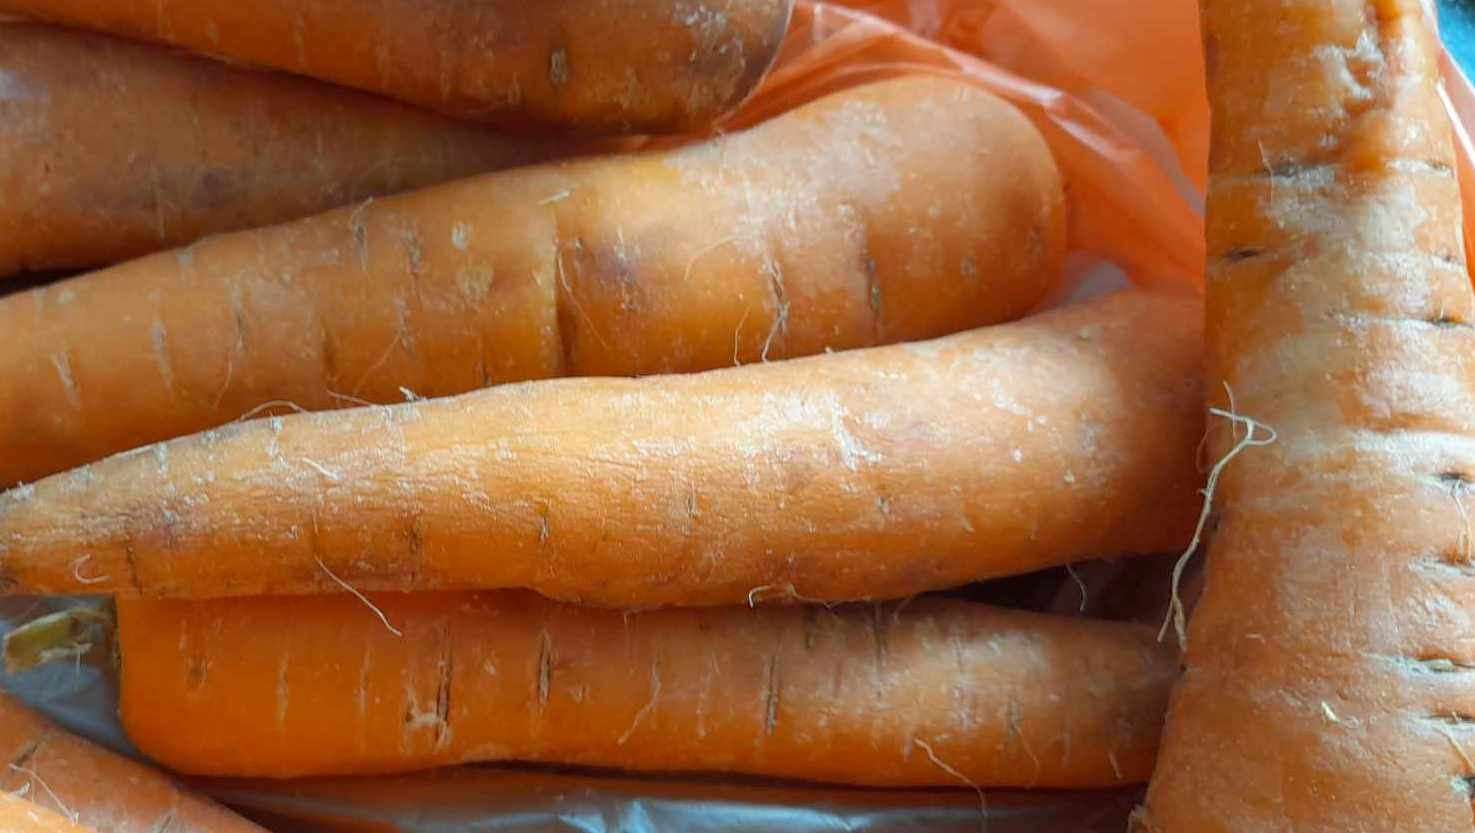 She added if she were shopping in store, she would not buy these carrots, so why should she receive them in her home delivery